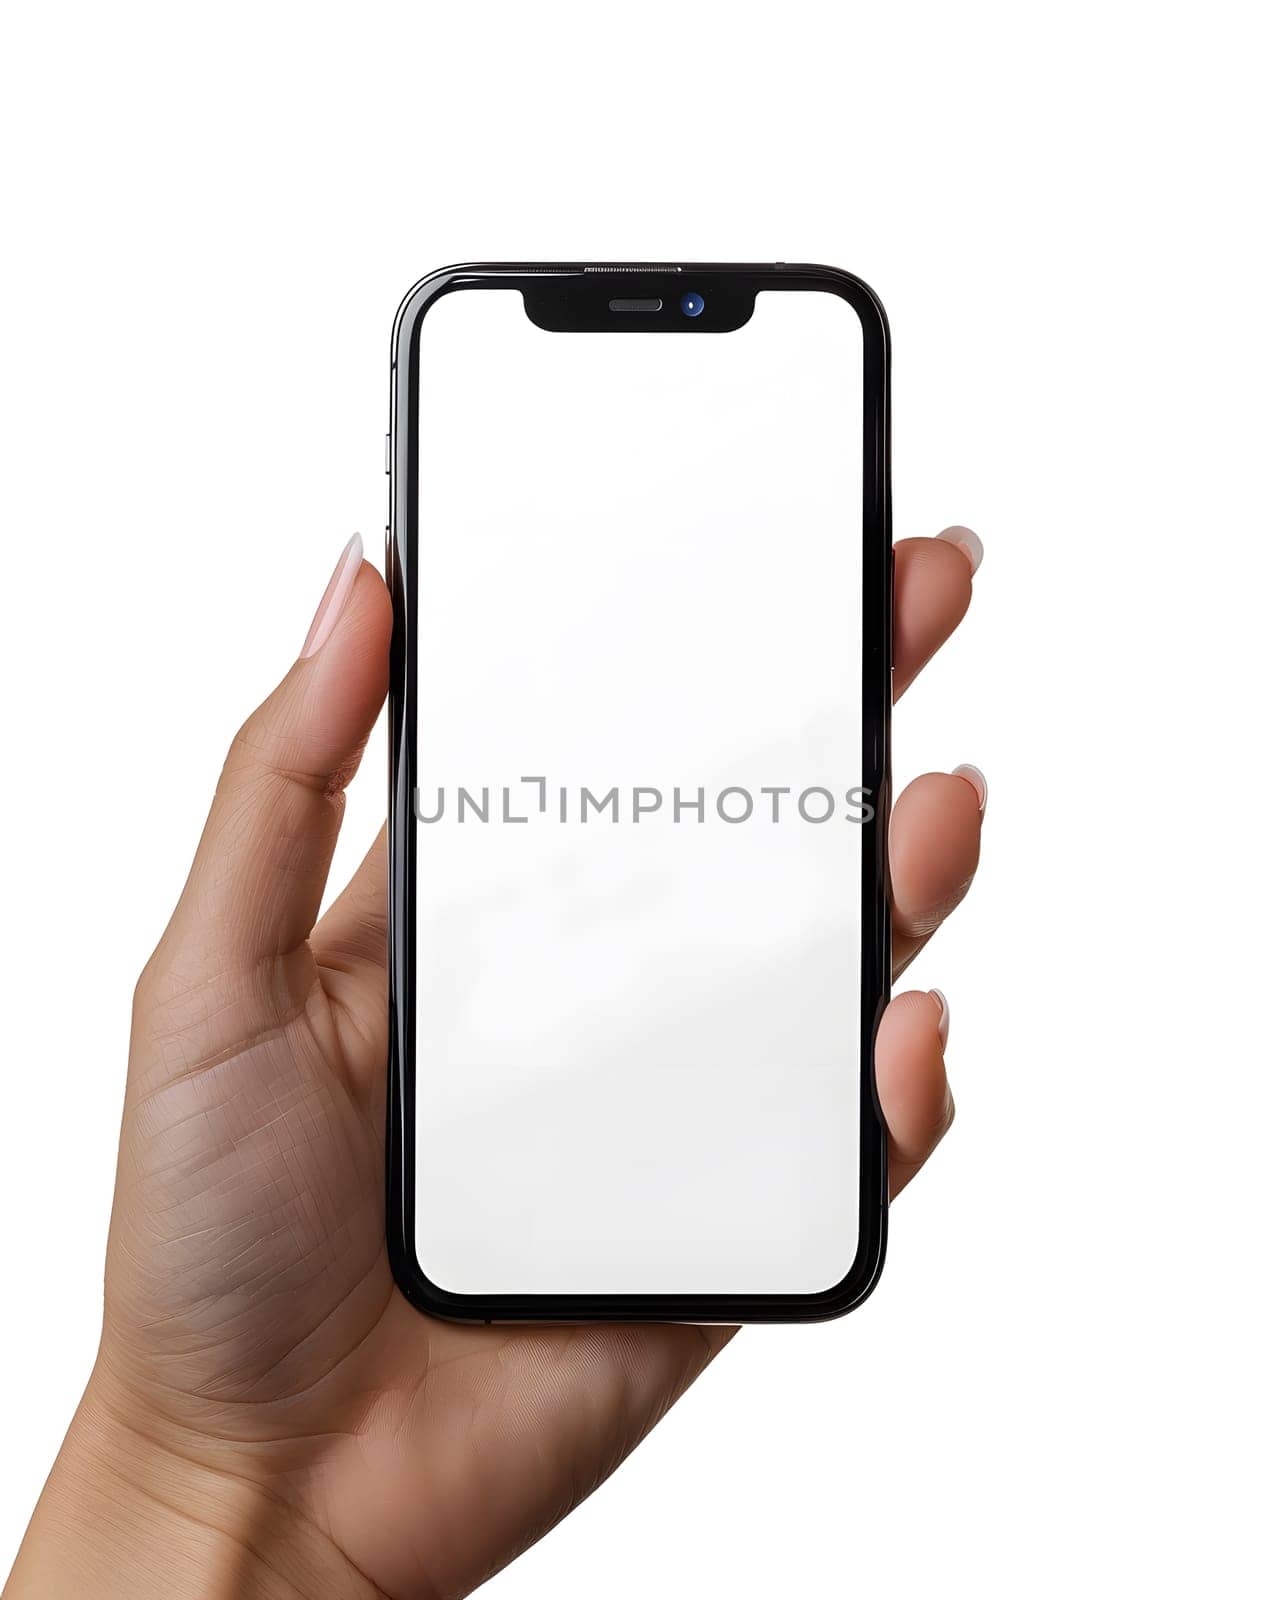 A hand is holding a mobile phone with a white screen, displaying no text. The rectangular communication device is a modern gadget controlled by gestures of fingers and thumbs